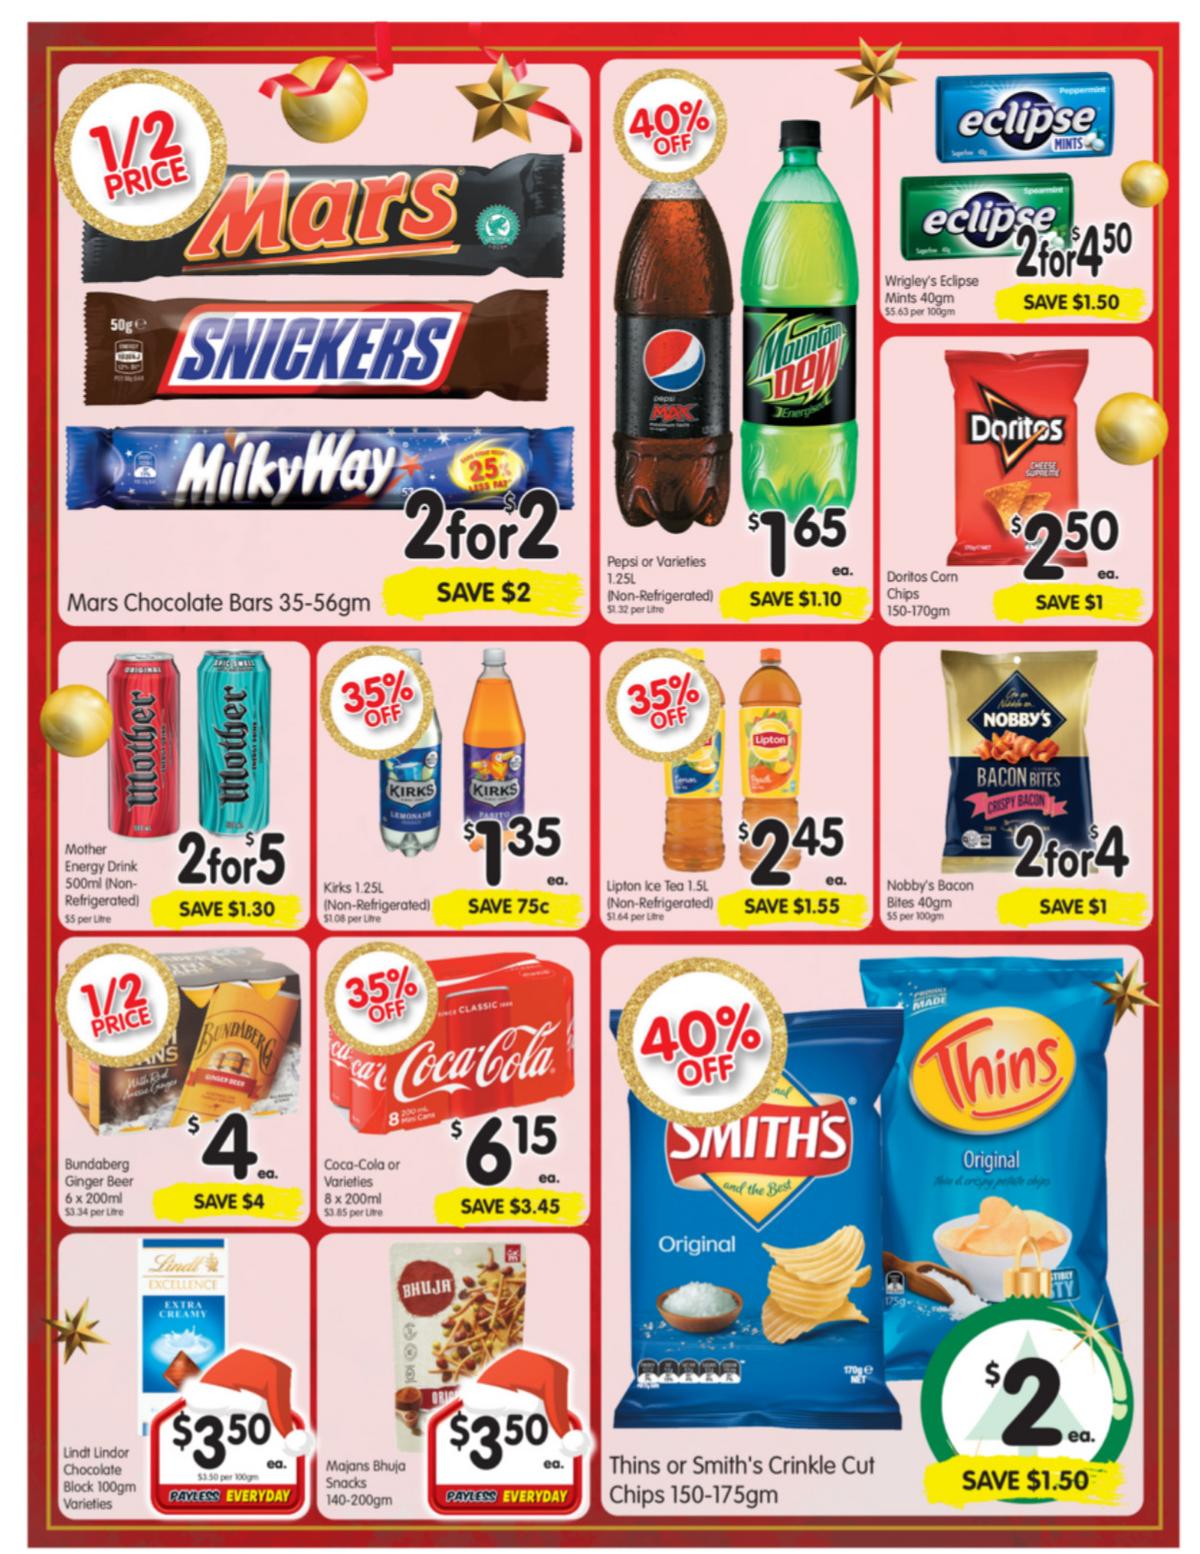 Spar Catalogues from 2 December